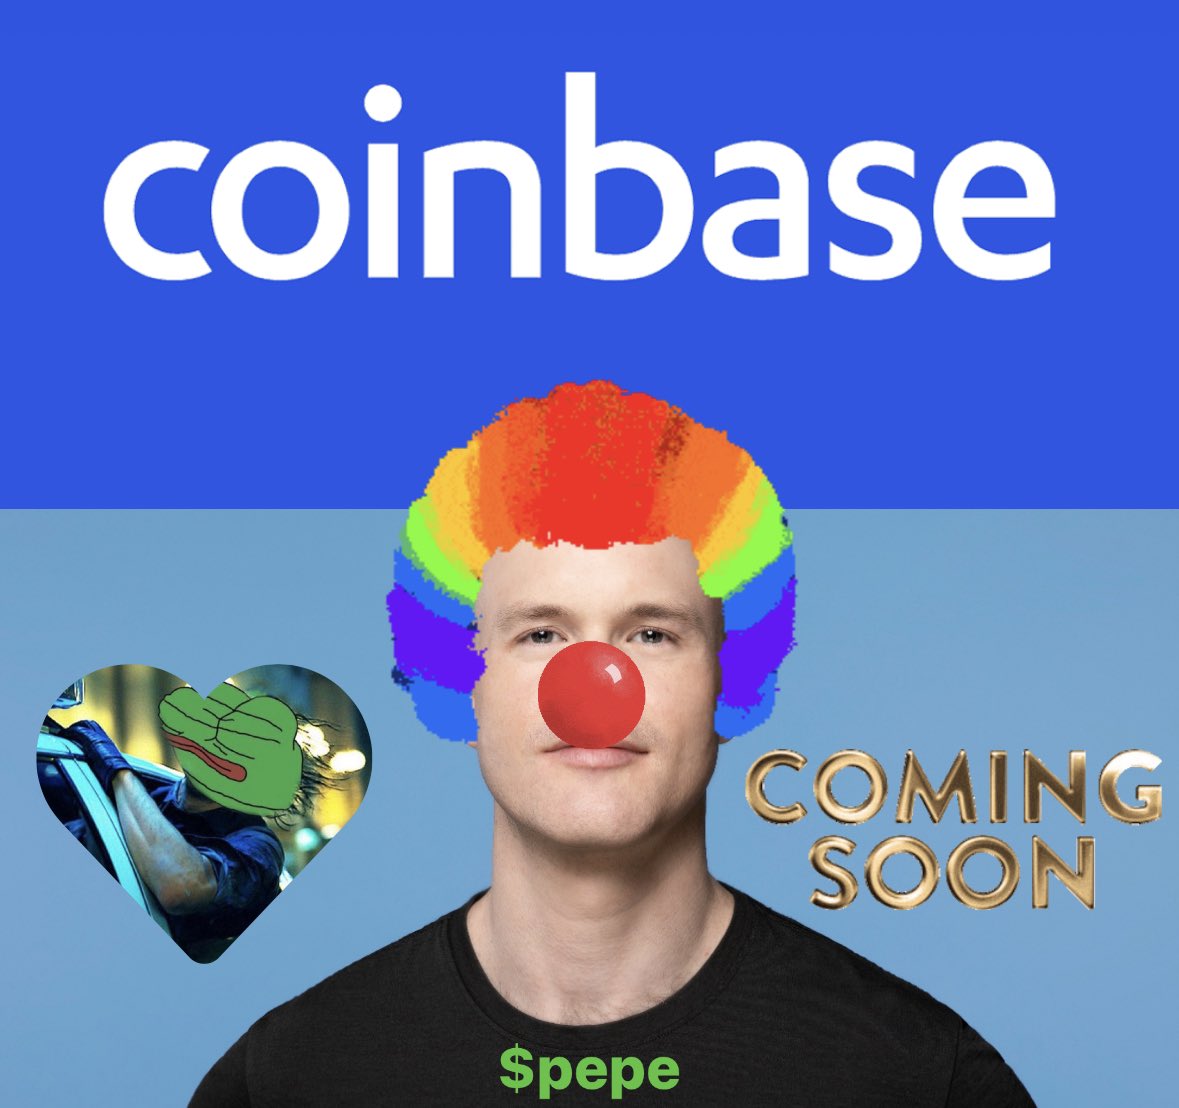 @coinbase @CoinbaseCloud @BuildOnBase @tokenproof @Forum3_ @belikewater893 BUILDING A COMMUNITY CENTRIC BRAND MEANS YOU DONT CALL $PEPE THE FROG A HATE SYMBOL. Pepe, created by @Matt_Furie in 2005 is the most beloved symbol of internet culture and memes. SHAME ON @brian_armstrong @jconorgrogan & @iampaulgrewal of @coinbase. #PEPEISLOVE not hate! 💚